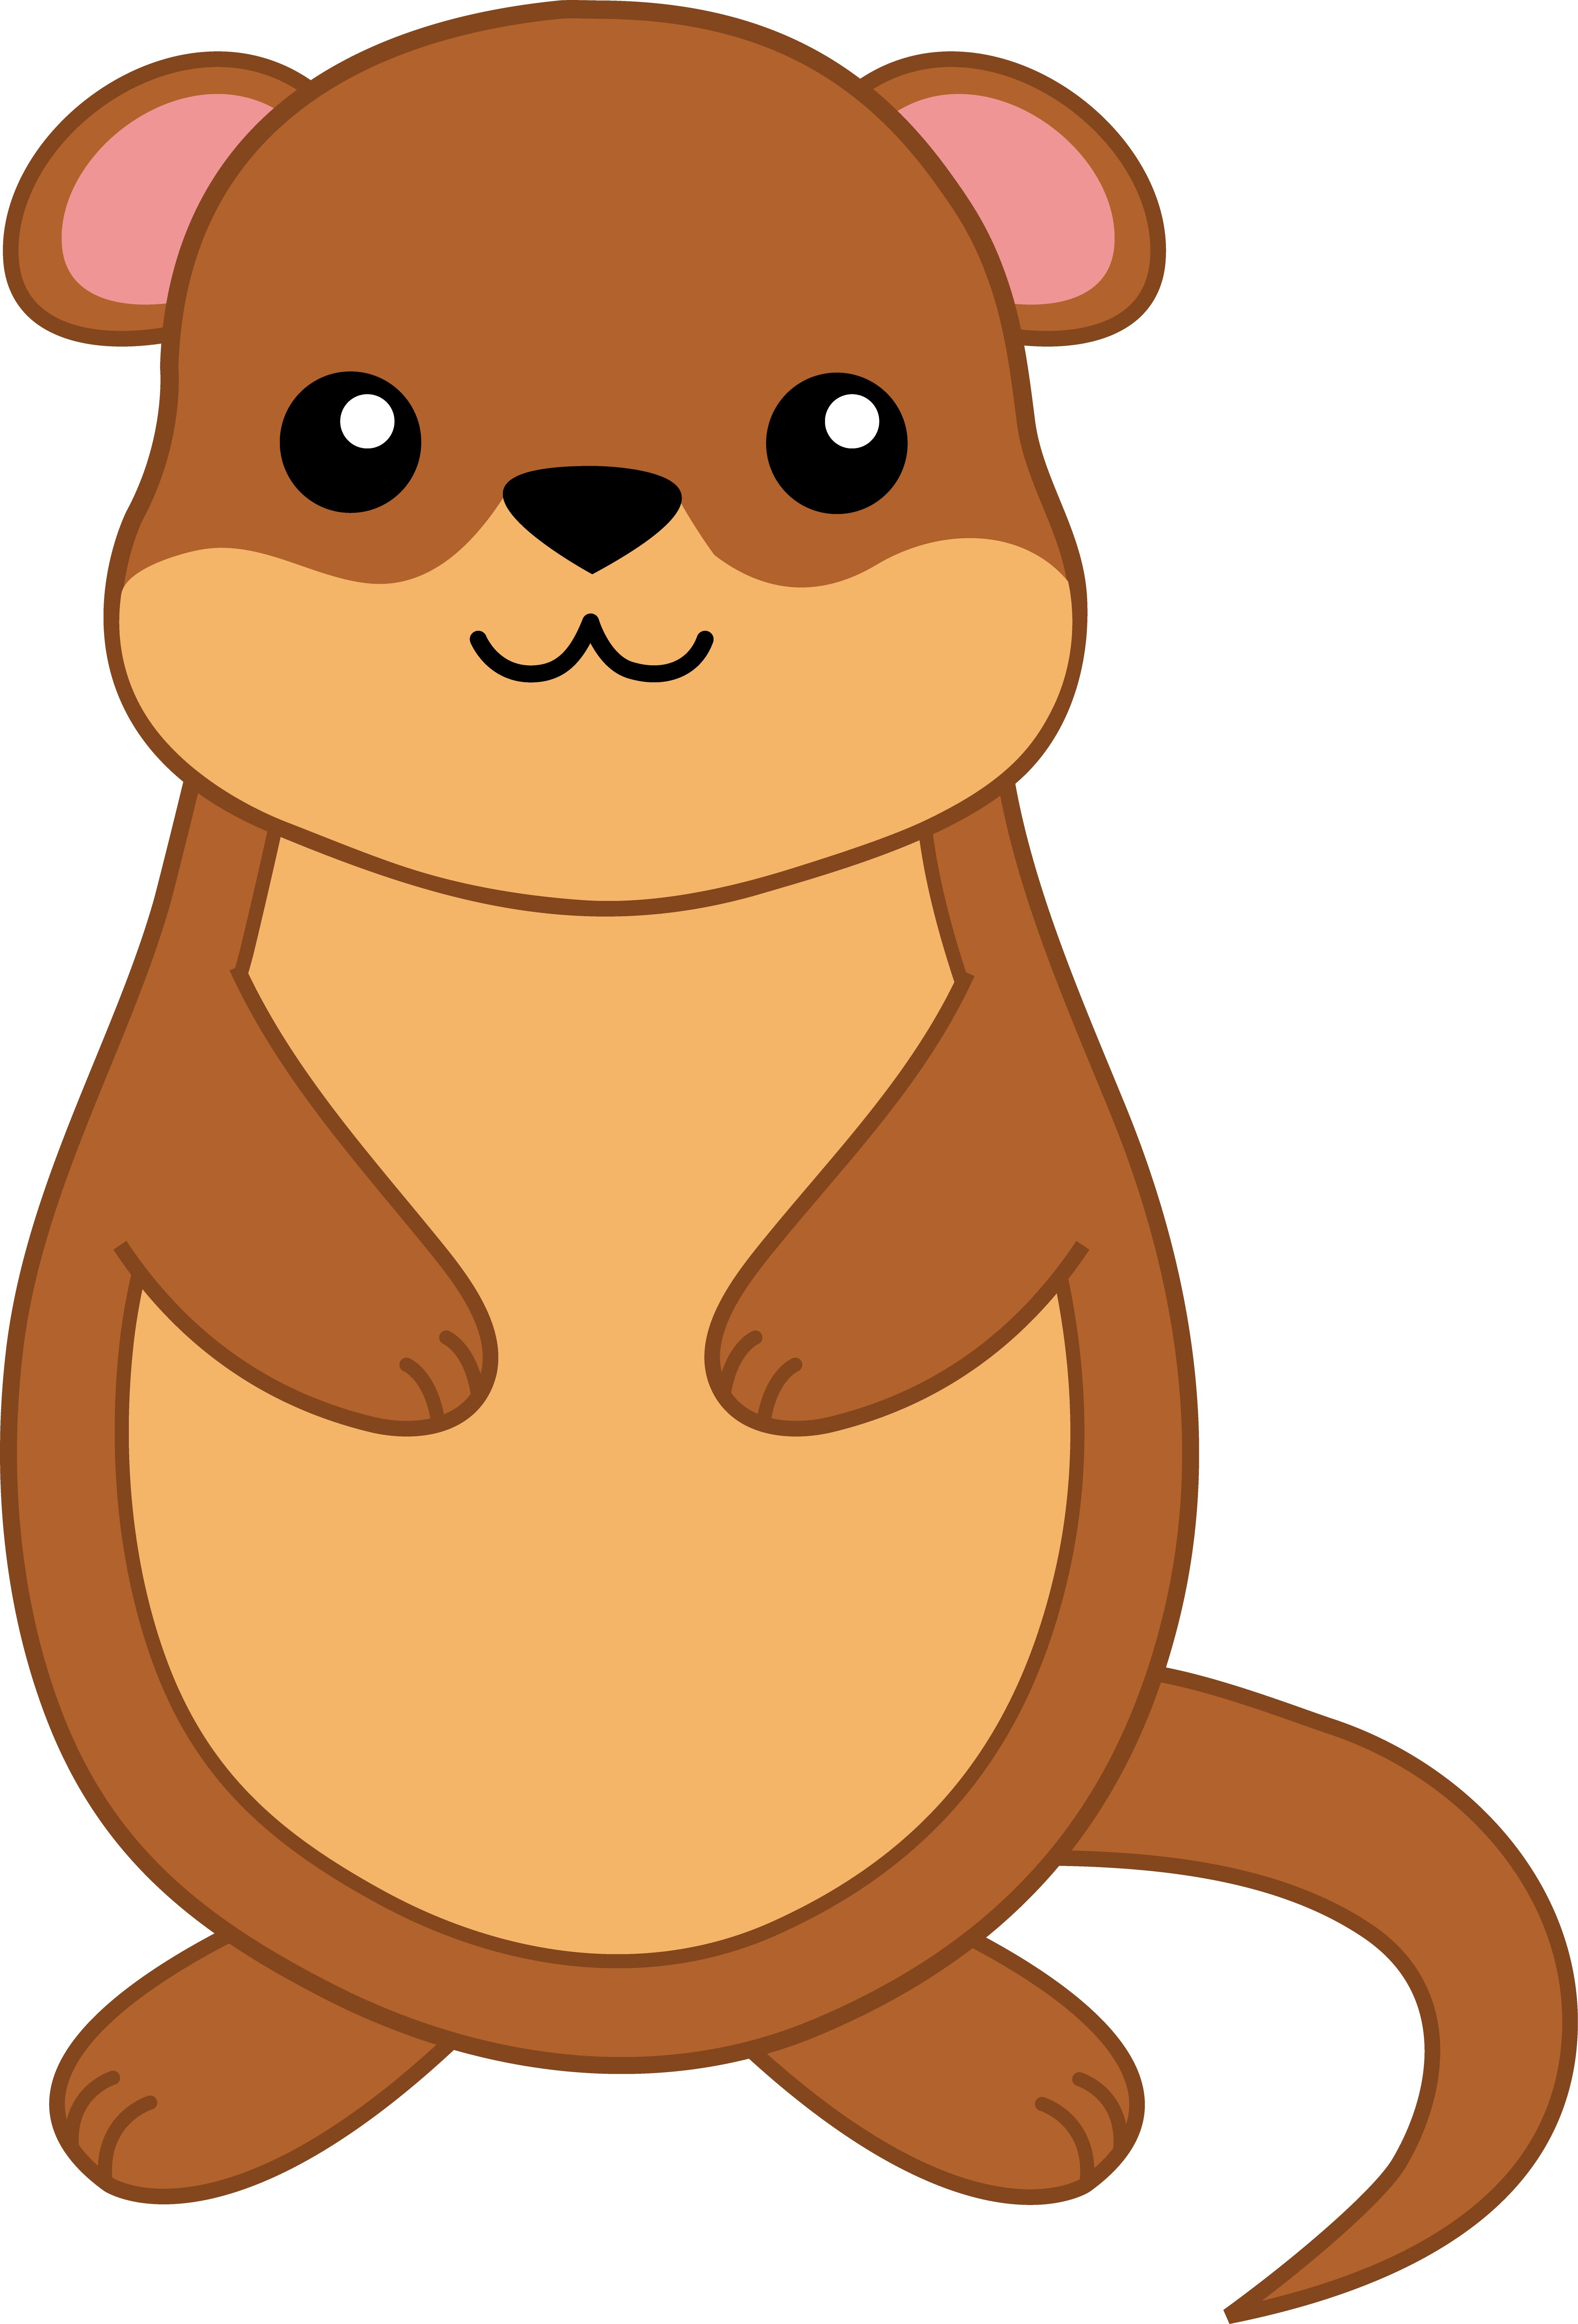 Groundhog Day Clipart - Cliparts.co